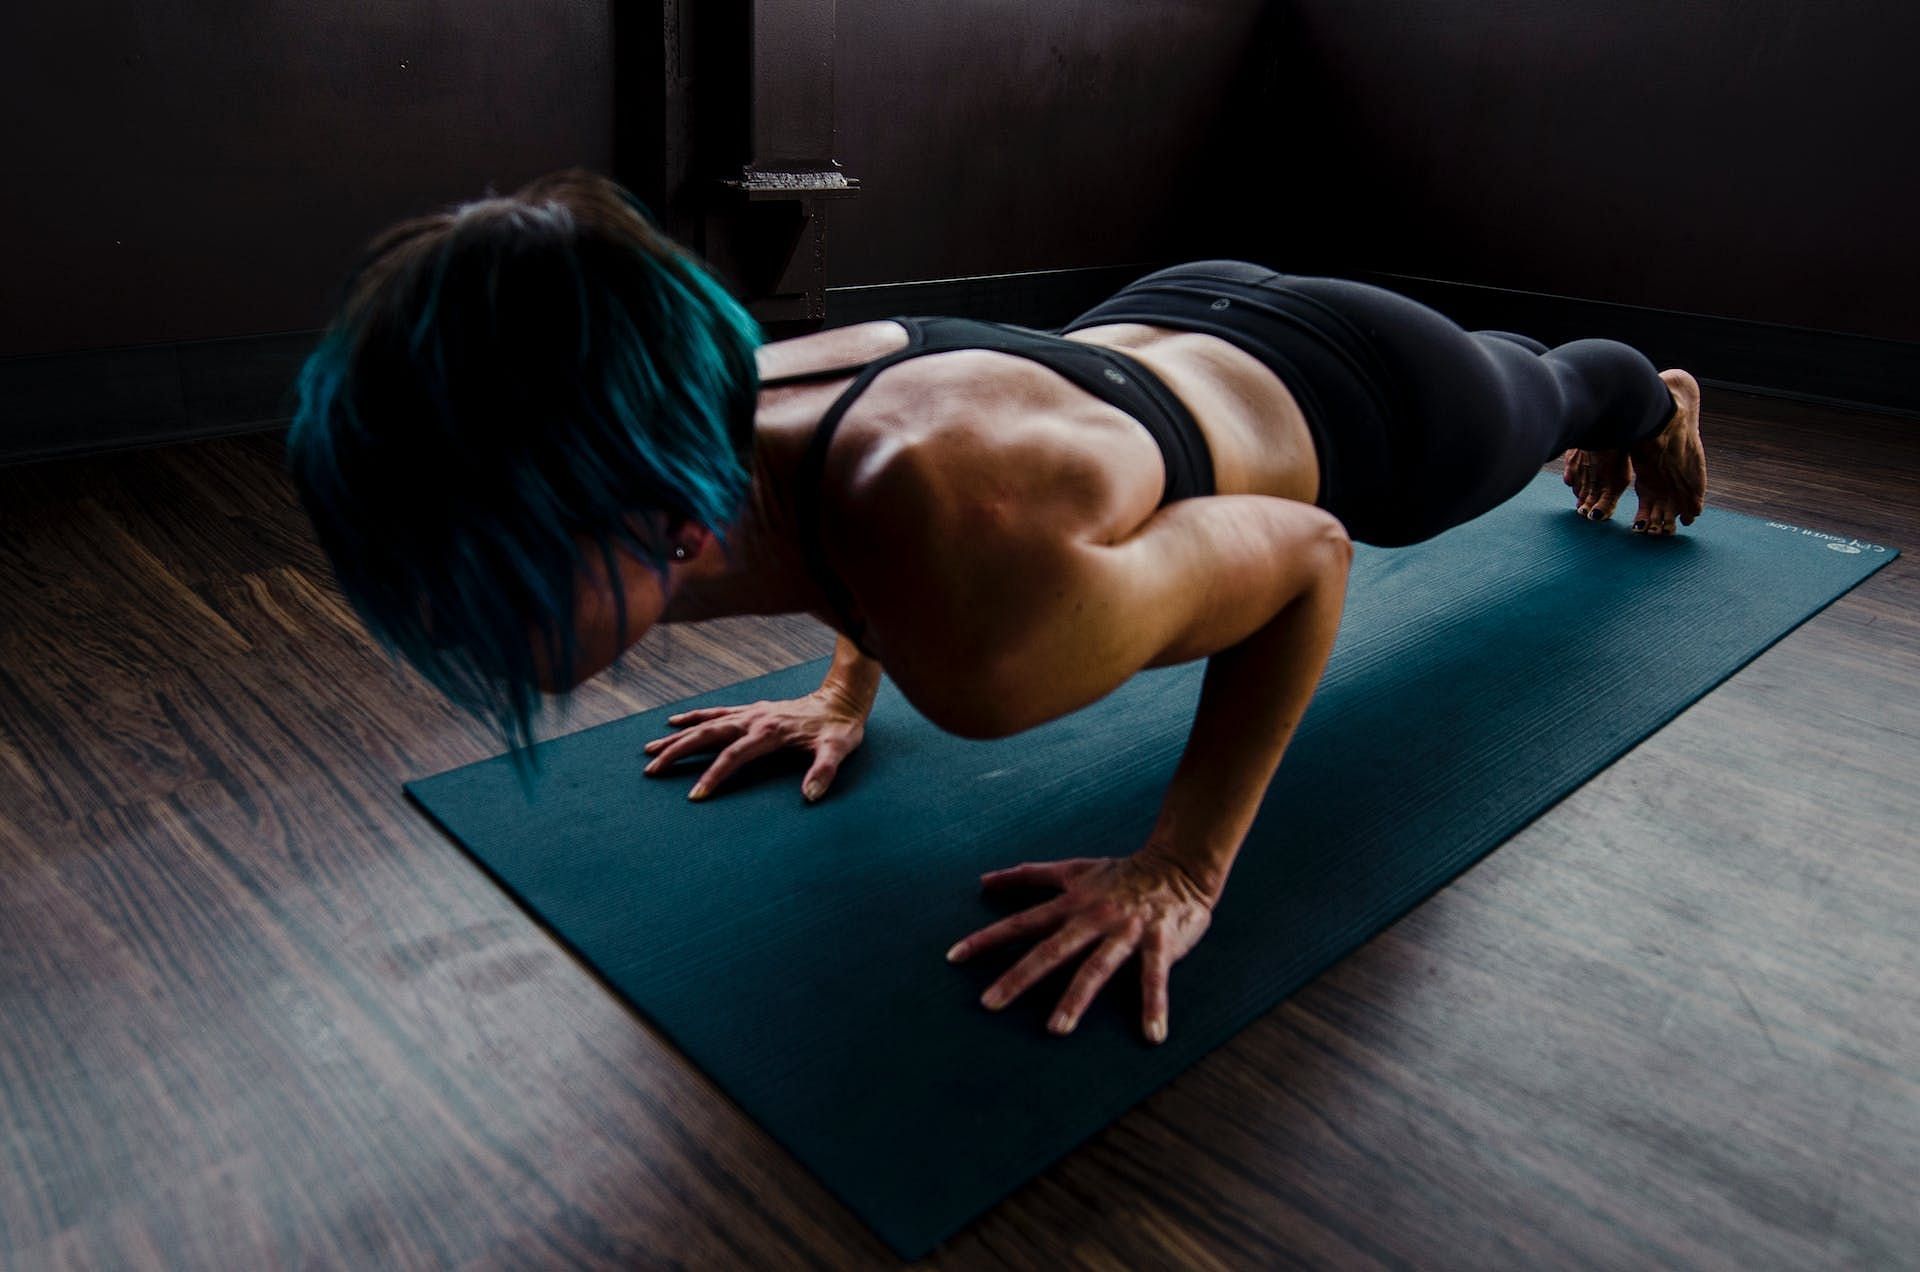 Swimming in Pilates targets the hamstrings and calves. (Image via Pexels/Karl Solano)